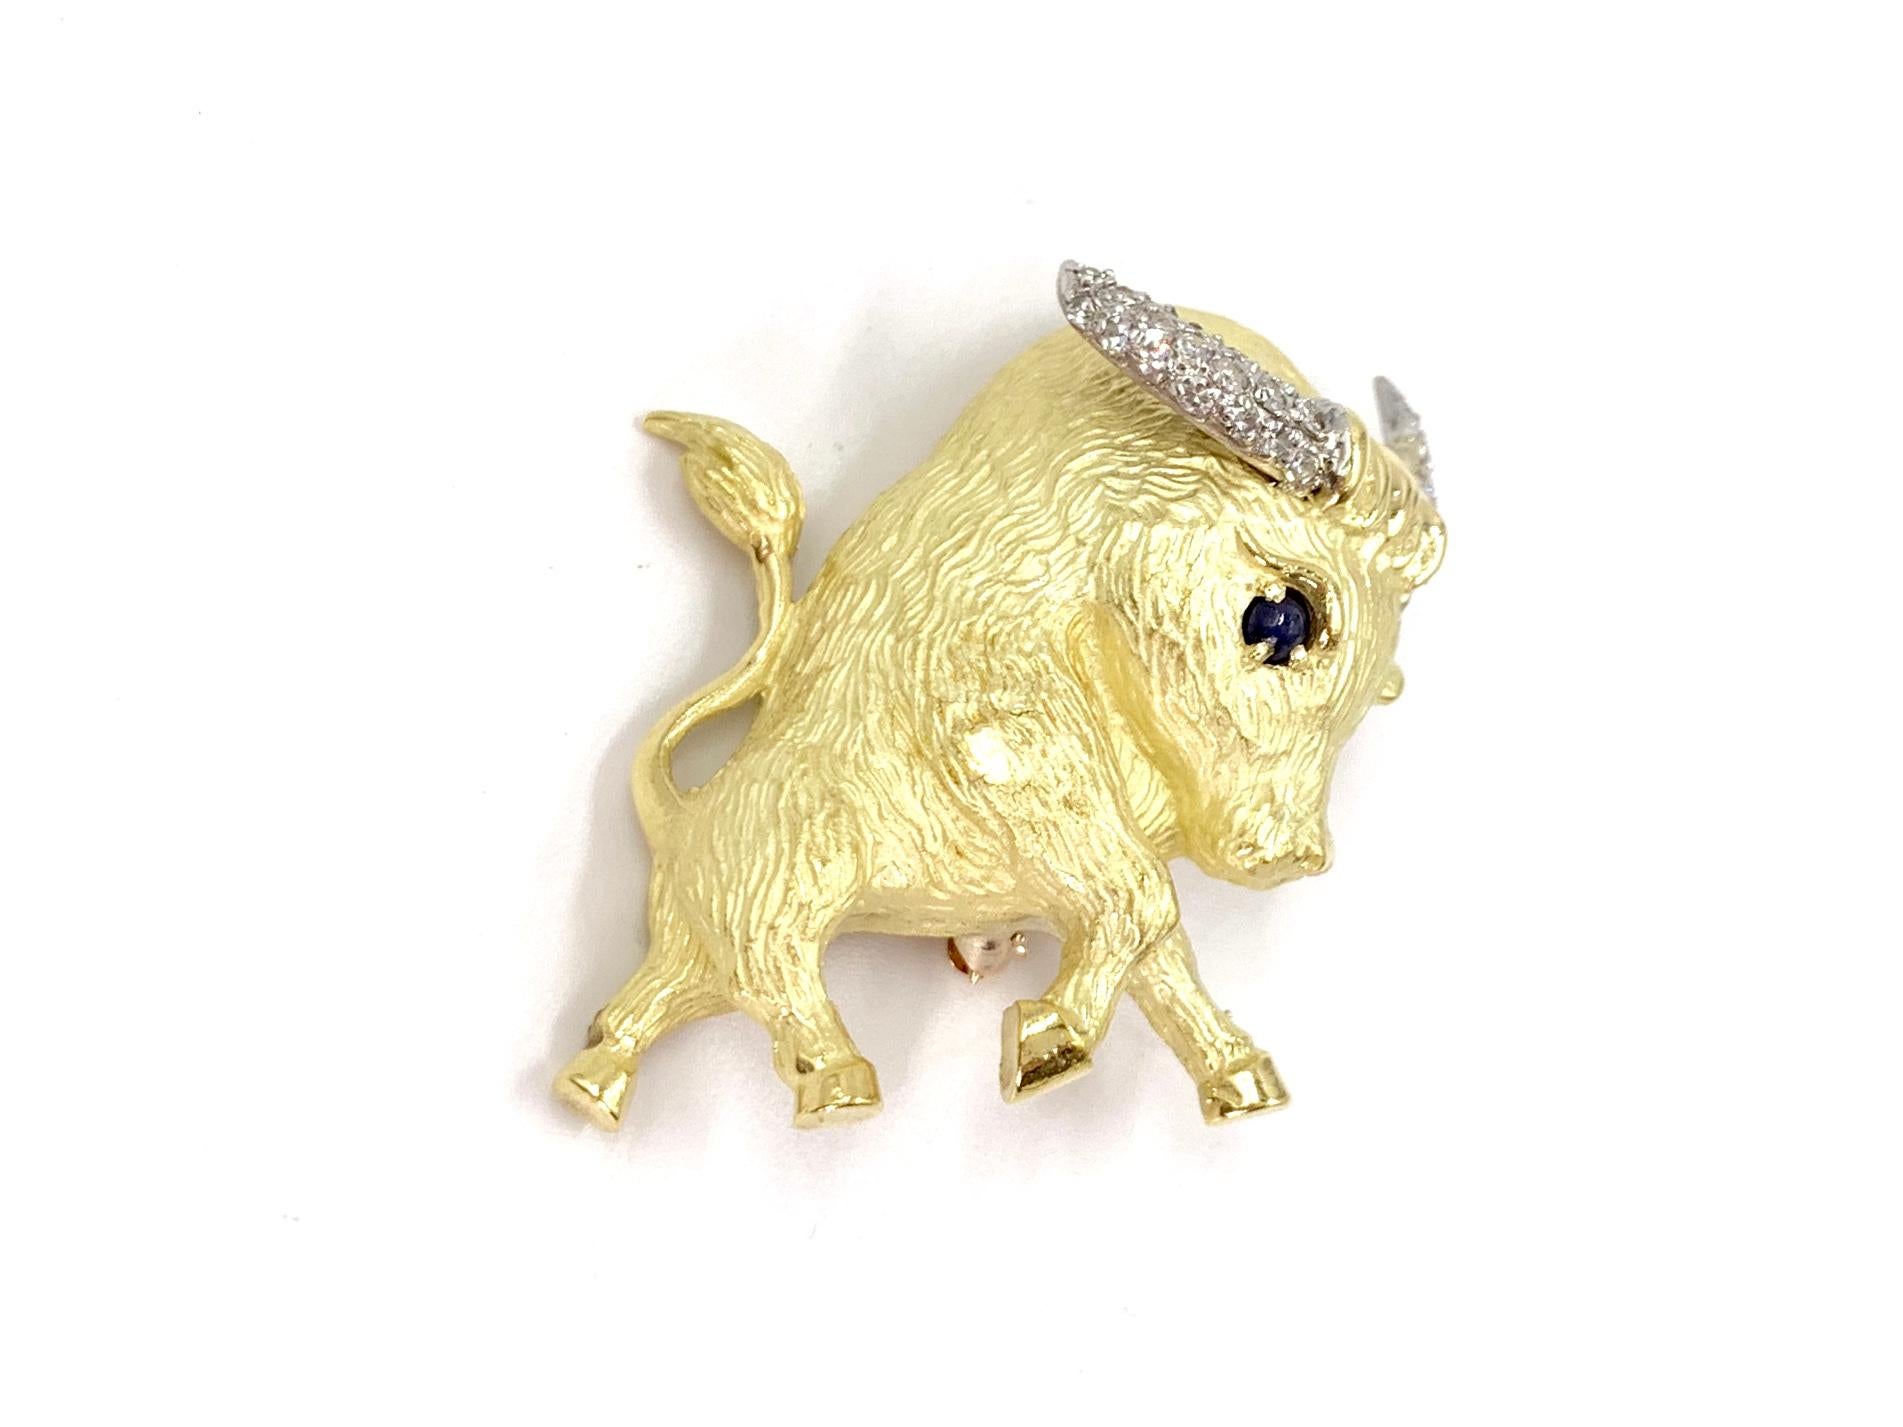 An adorable 18 karat yellow gold charging bull features a single dark blue cabochon sapphire and white single-cut diamond encrusted horns on this hand made brooch. Bull is hand finished with a matte/acid wash throughout the body and polished tail,